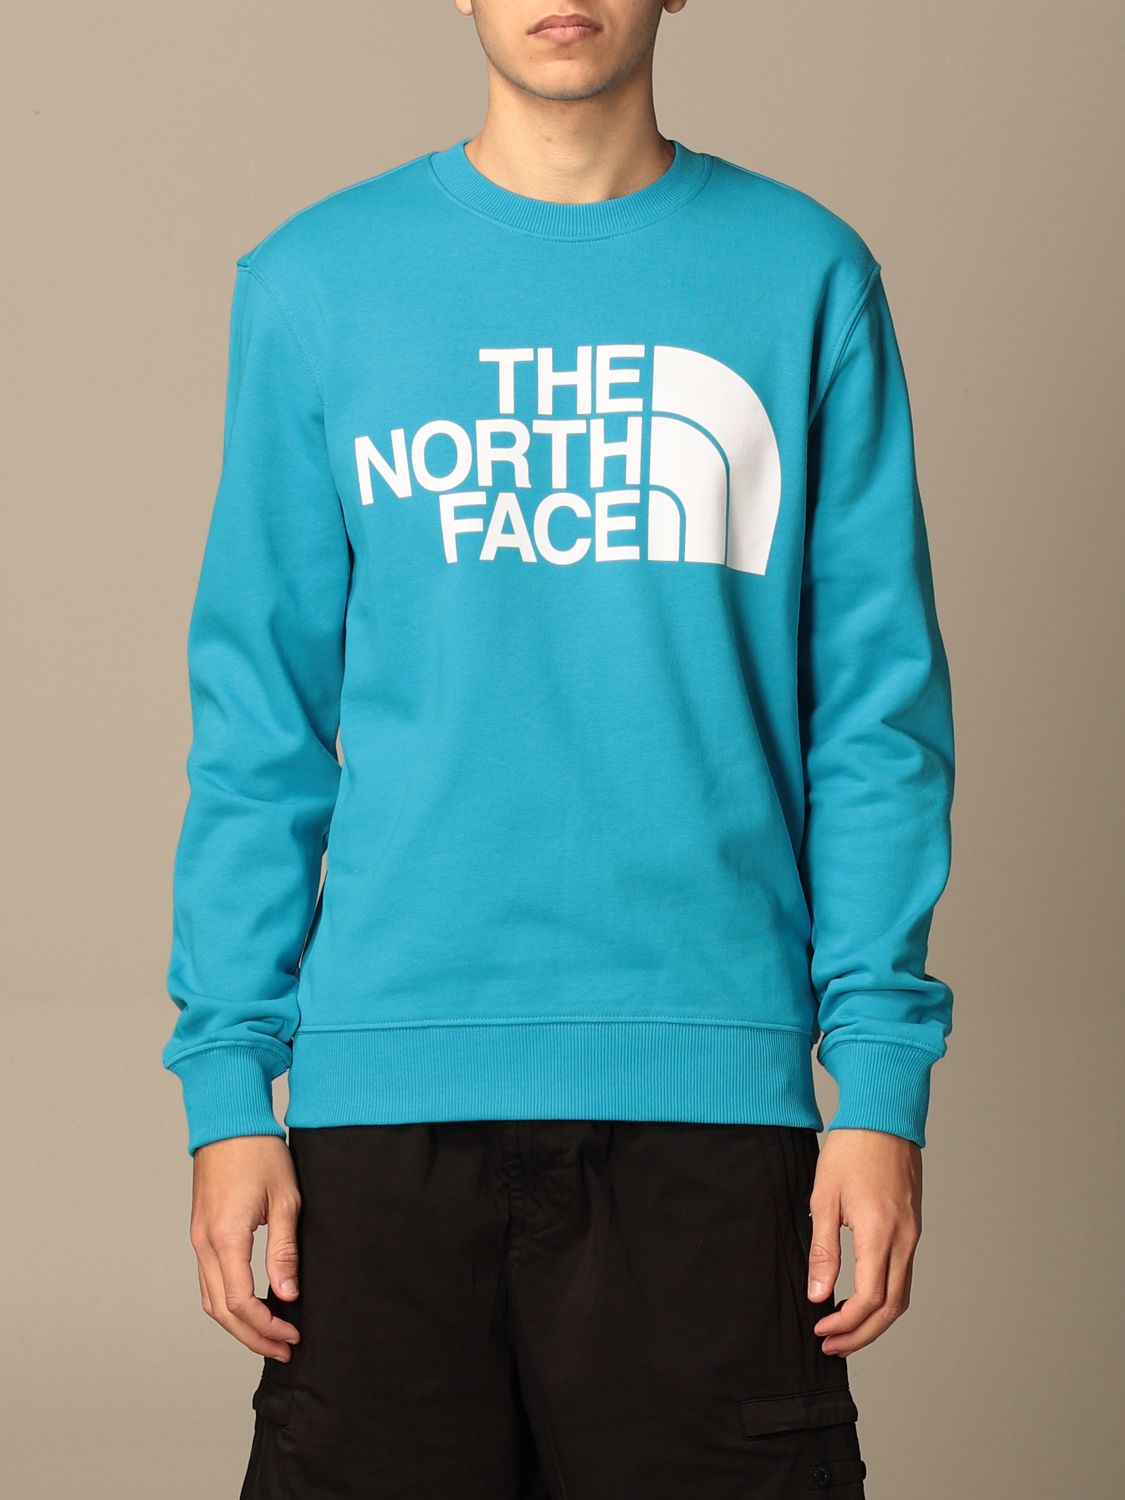 The North Face sweatshirt NF0A4M7W 